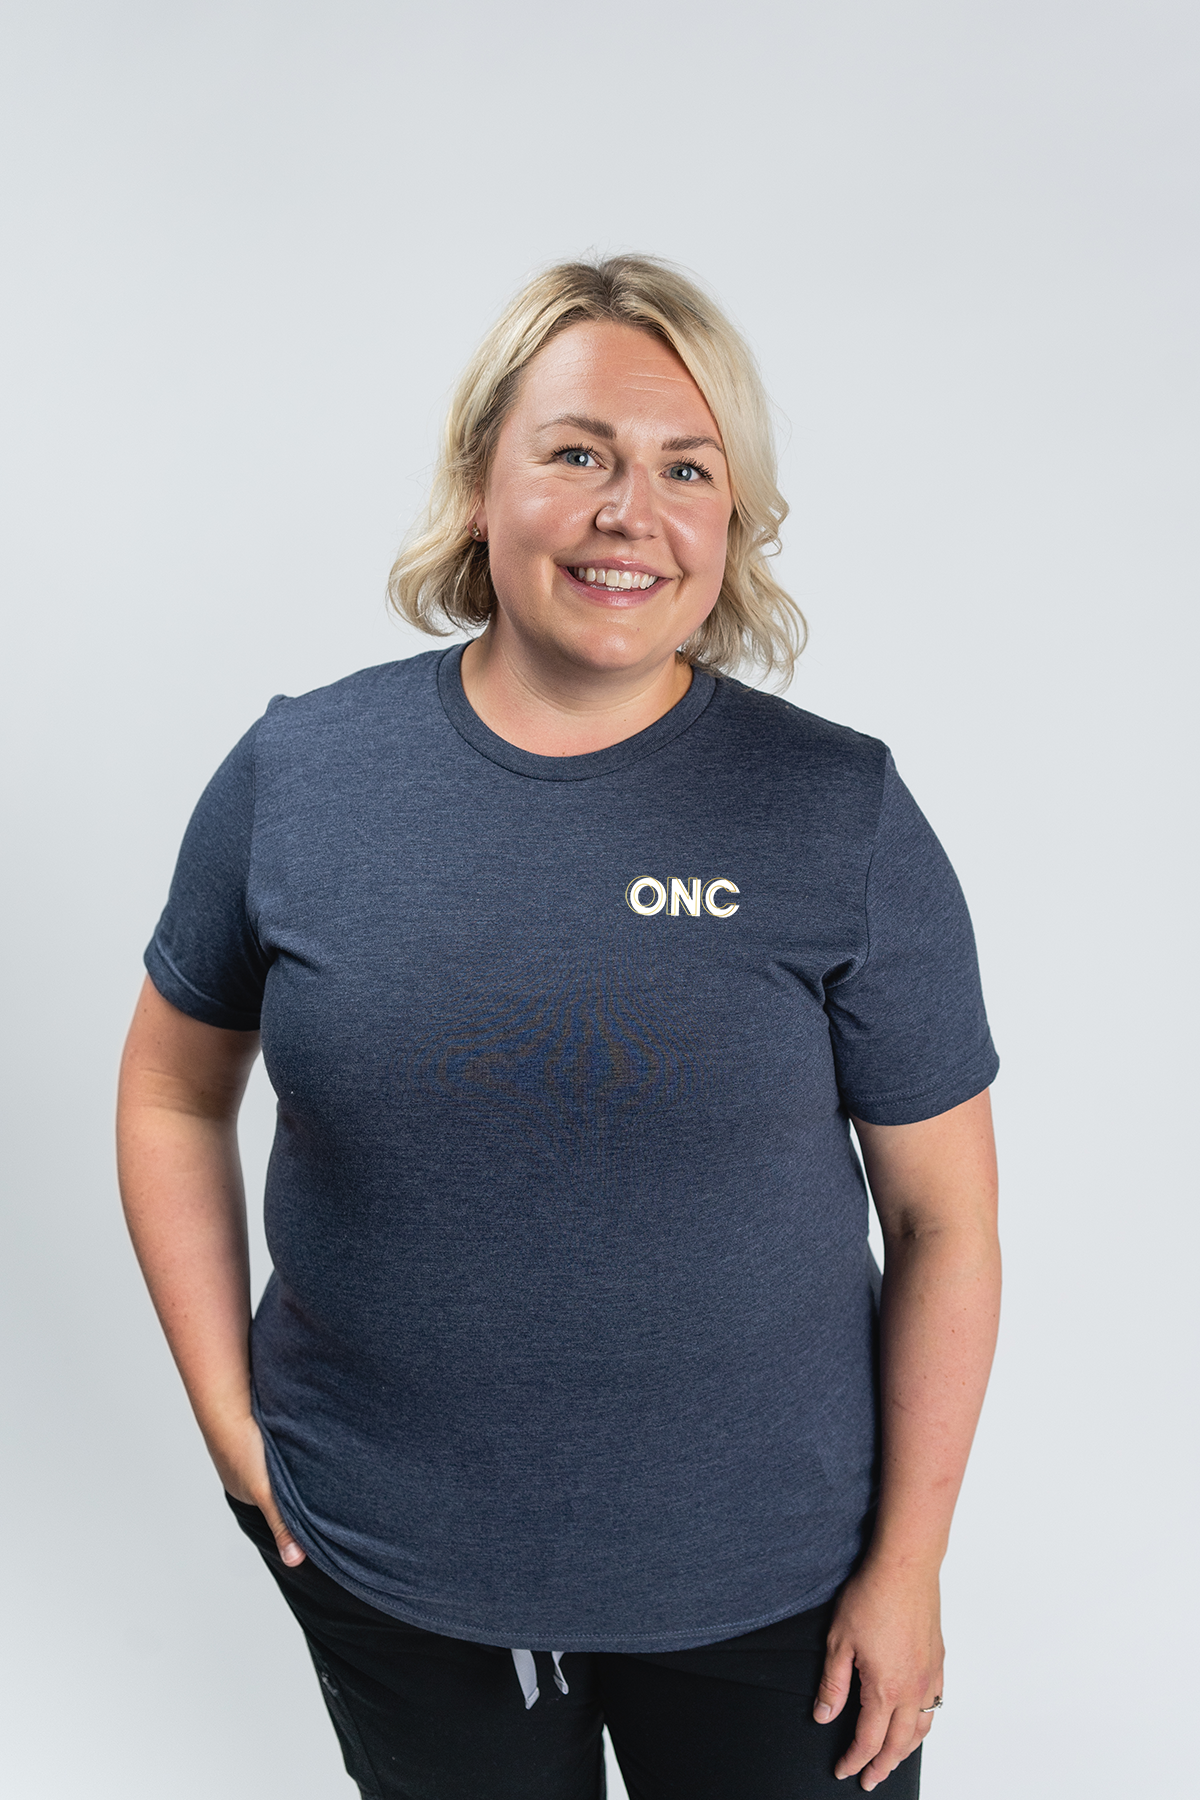 Oncology Creds - Shirt